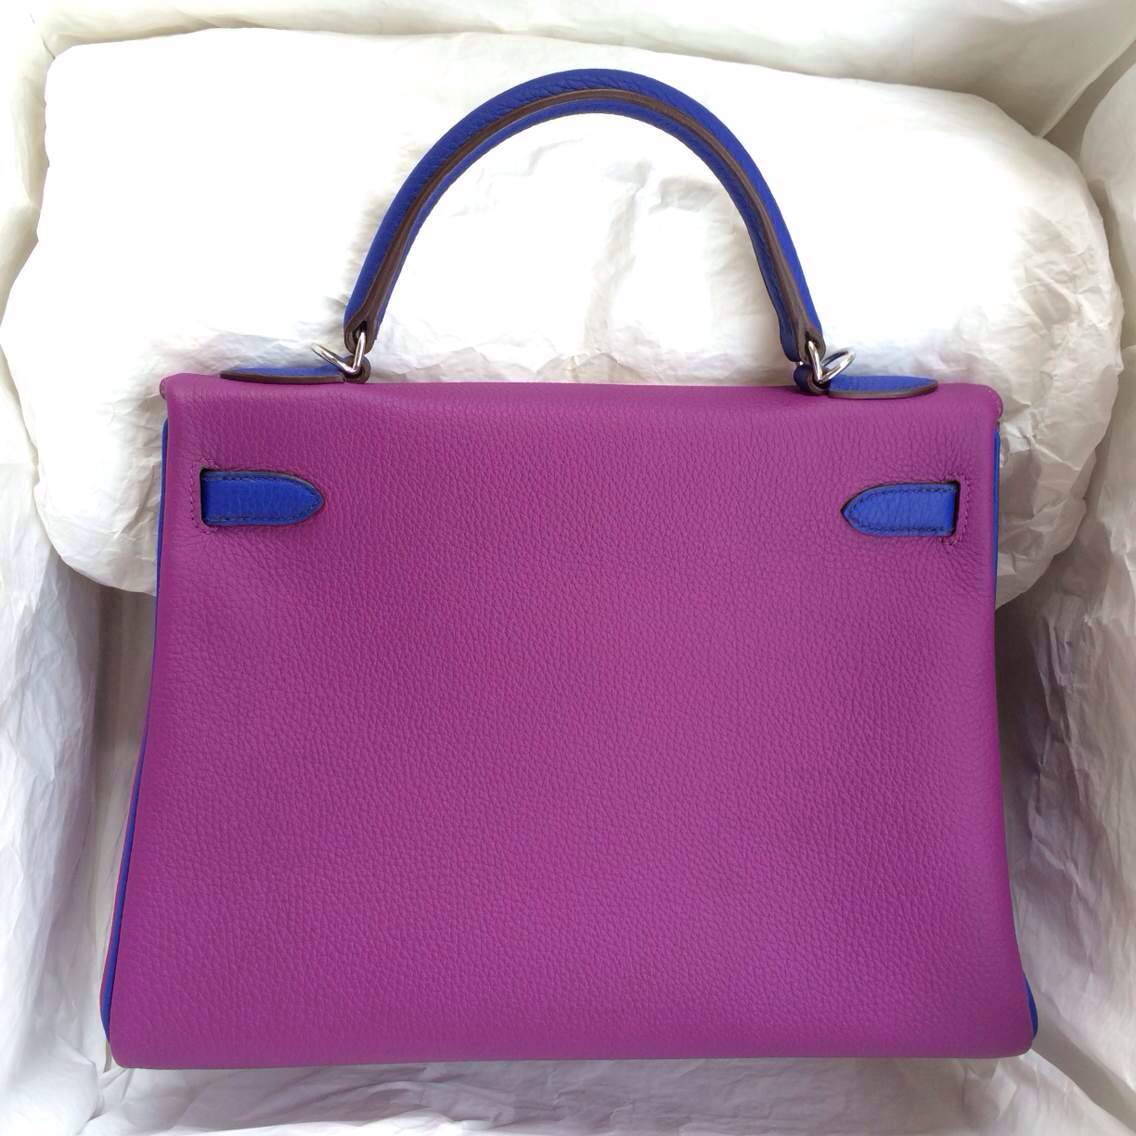 Wholesale Hermes Kelly Bag32cm P9 Anemone/7T Blue Electric Togo leather Silver Hardware